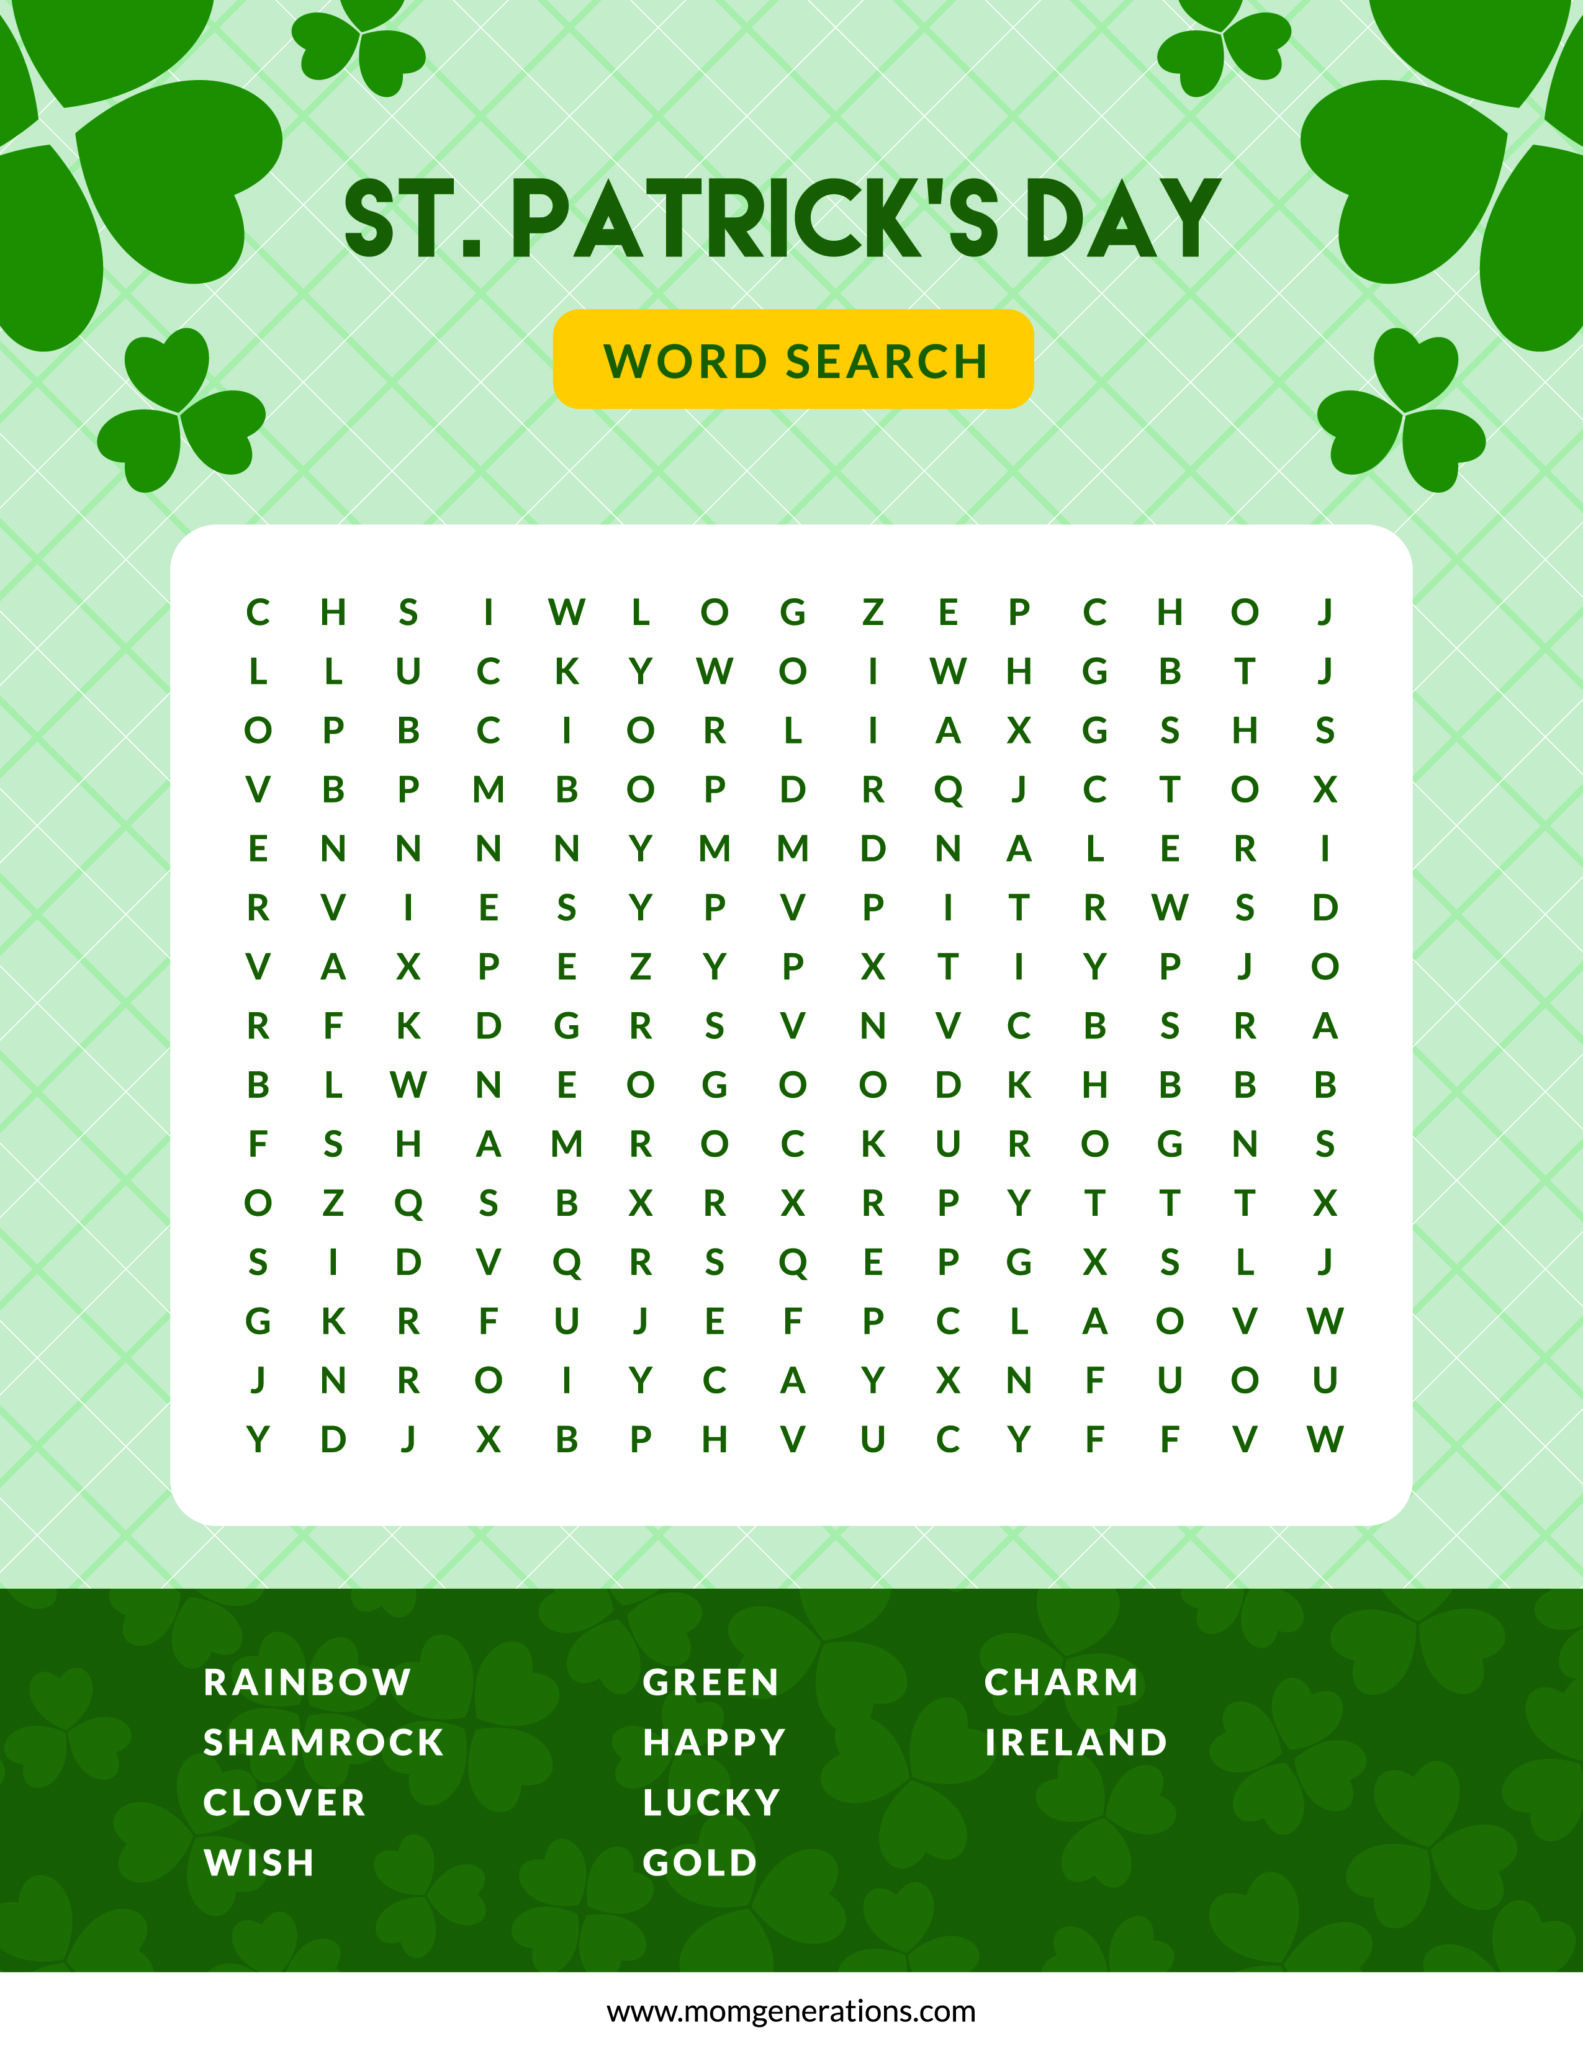 st-patrick-s-day-word-search-pdf-mom-generations-stylish-life-for-moms